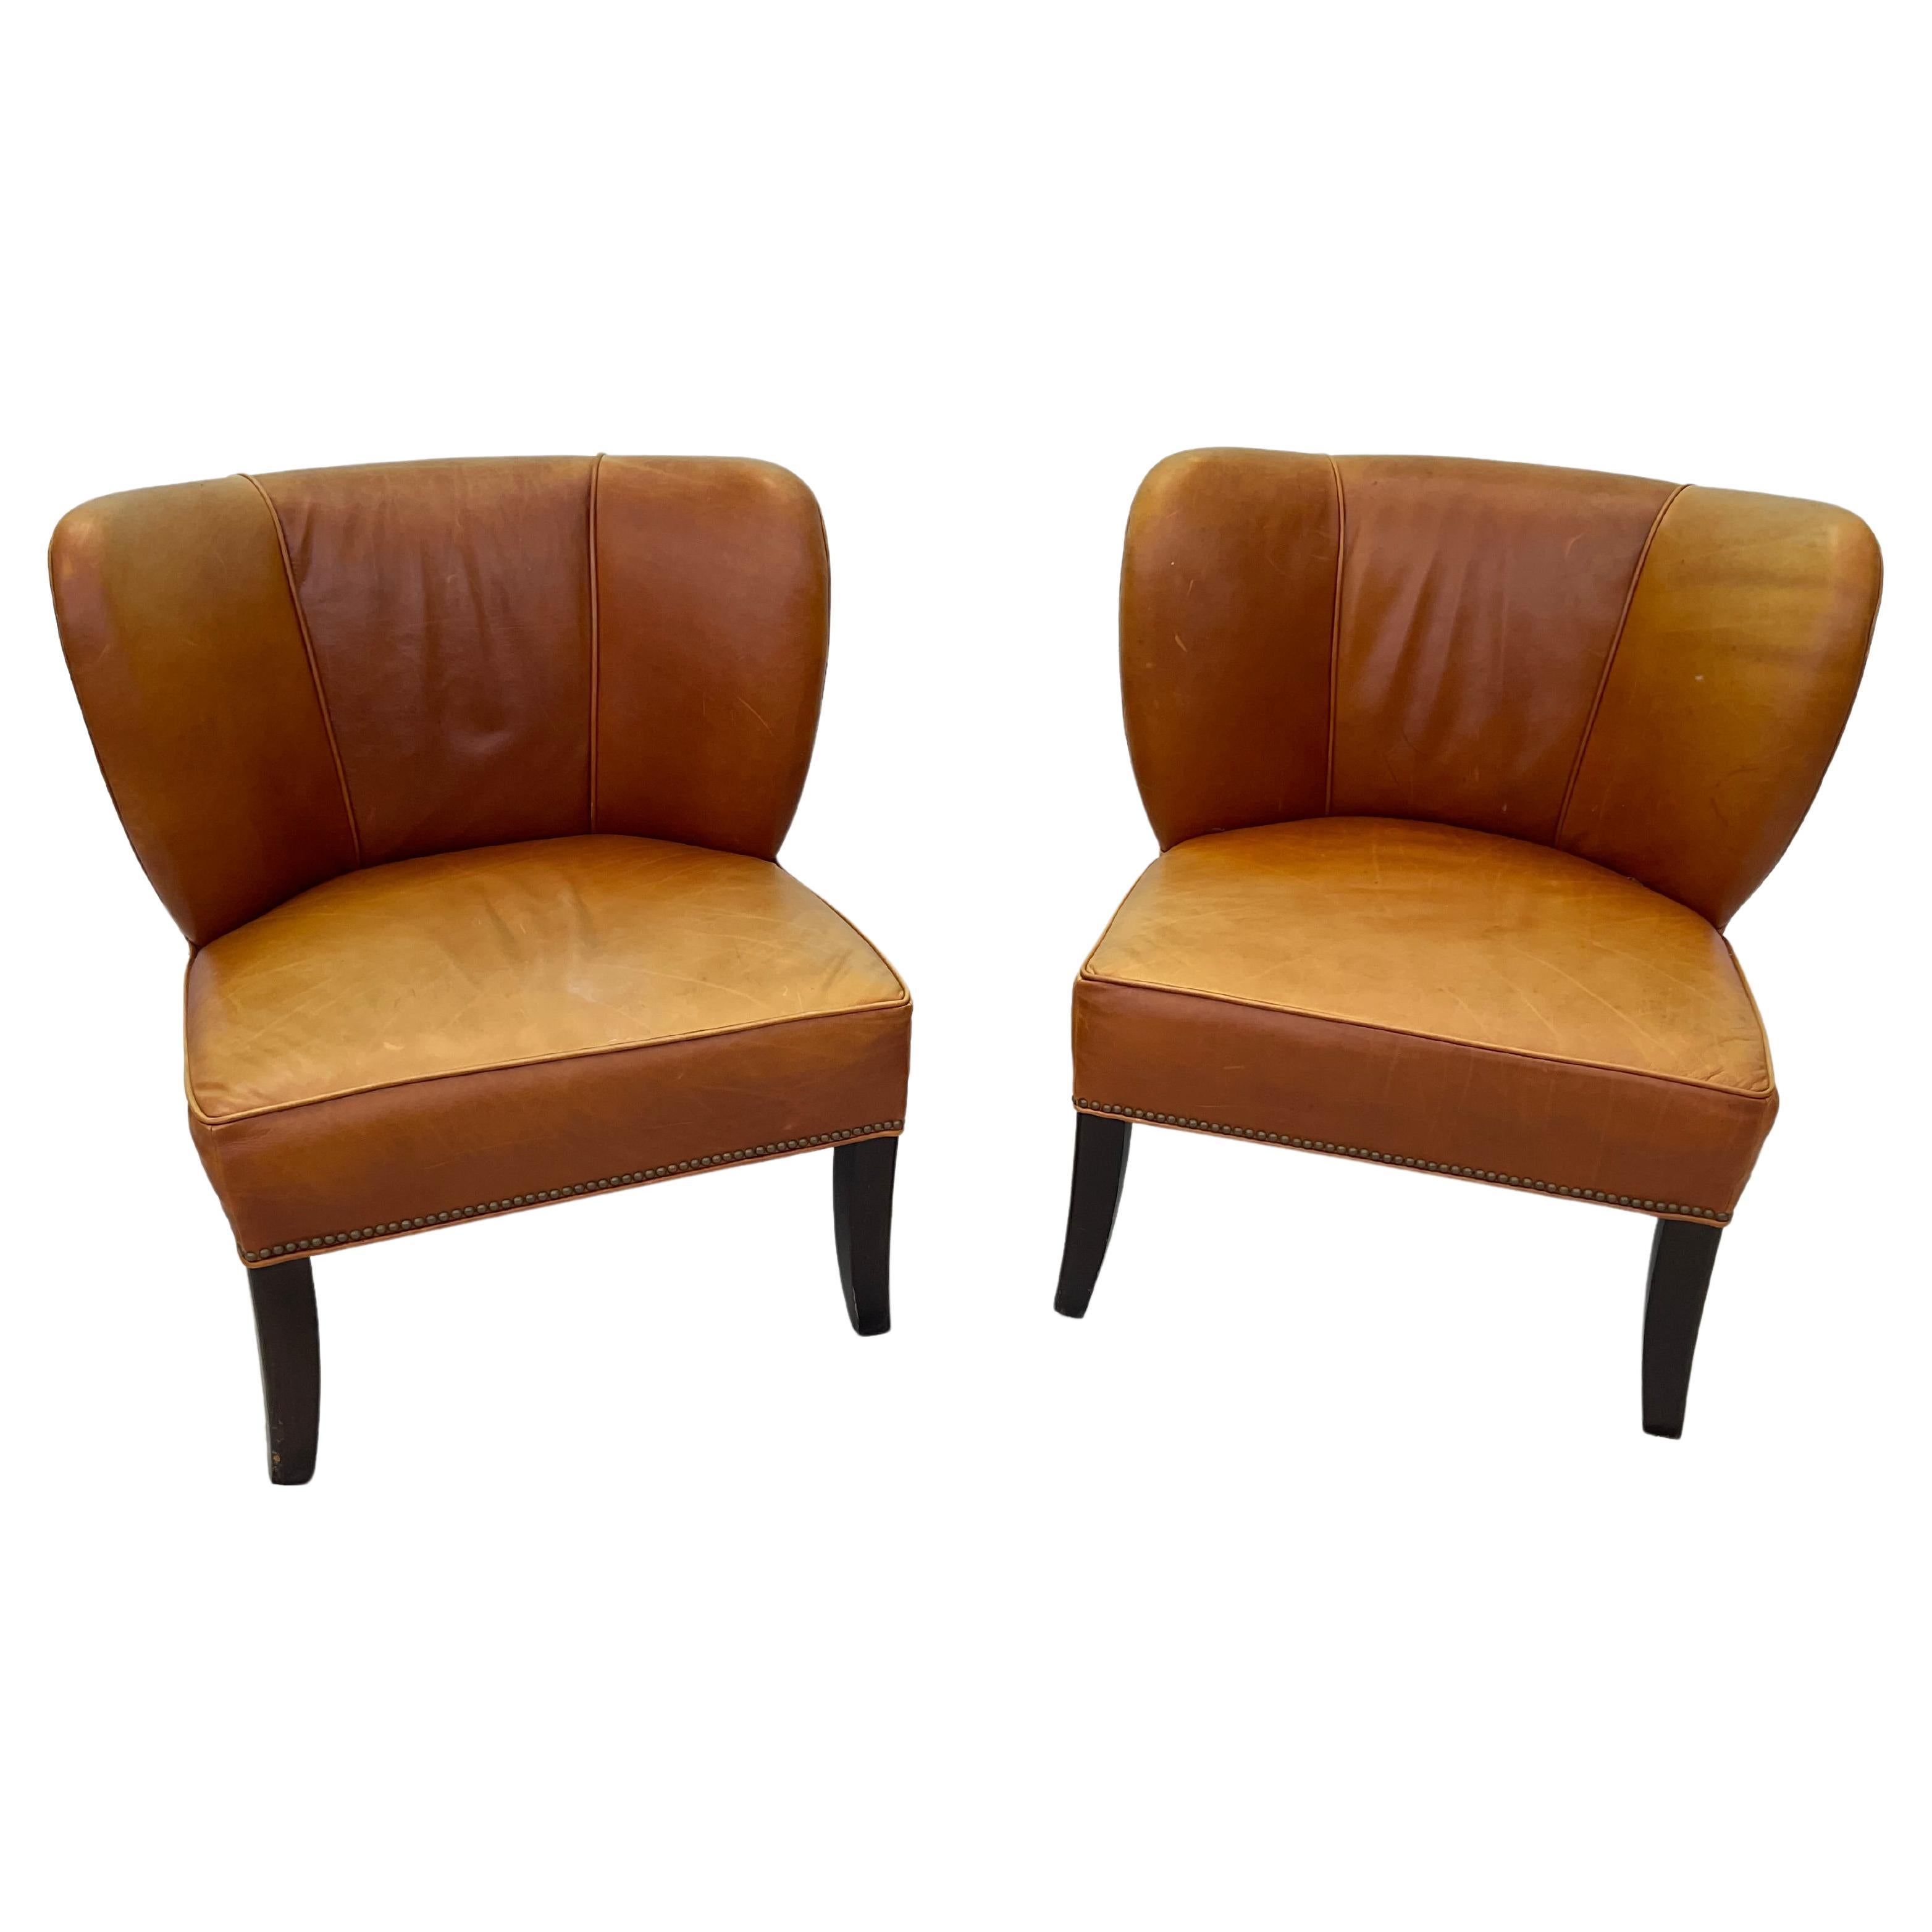 Pair Of Arhaus Italian Leather Lounge Chairs For Sale